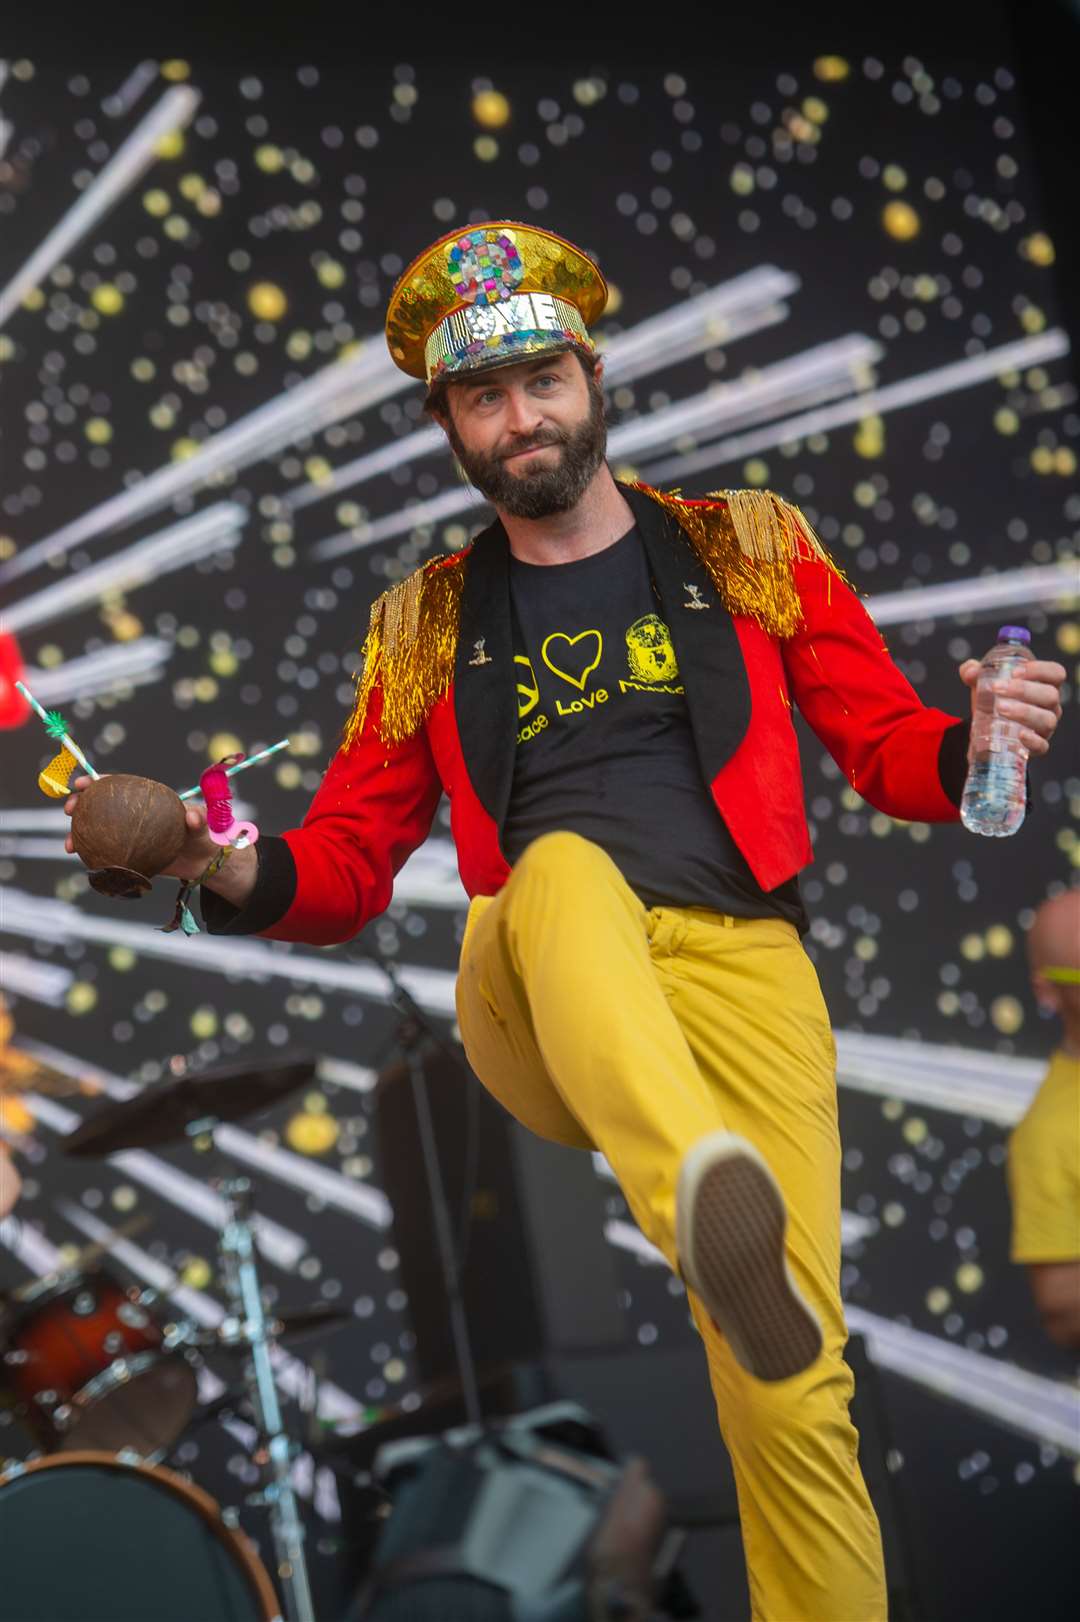 Already part of the Belladrum legend, Colonel Mustard (John McAlinden) & The Dijon 5 were back to deliver peace, love – and mustard. Picture: Callum Mackay